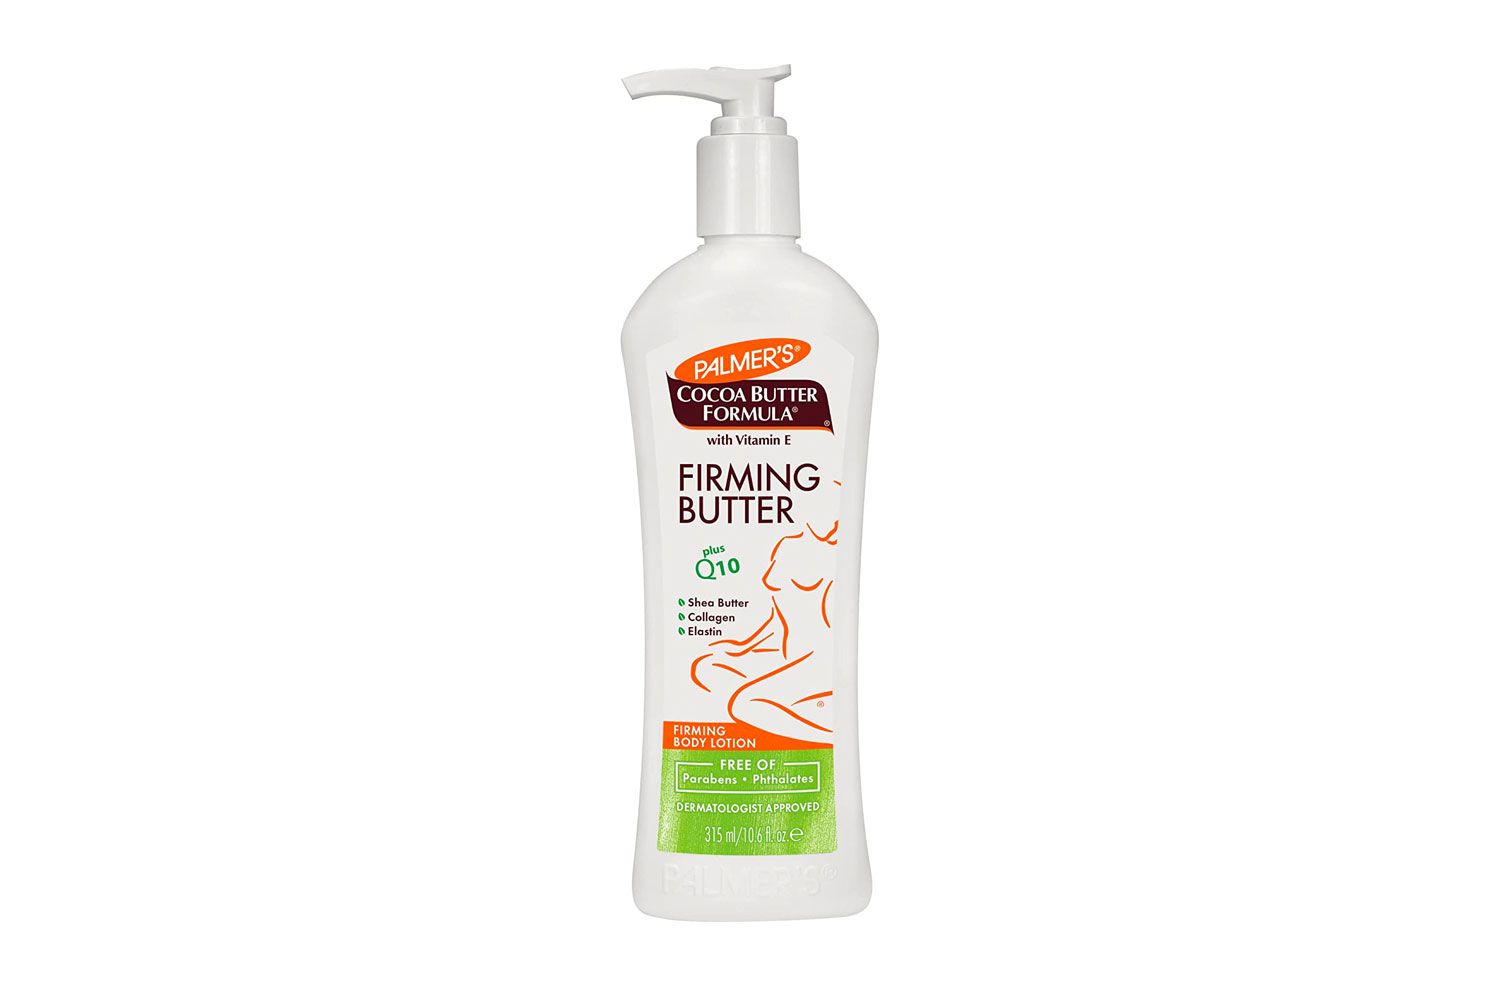 Palmer's Cocoa Butter Firming Butter Skin Lotion